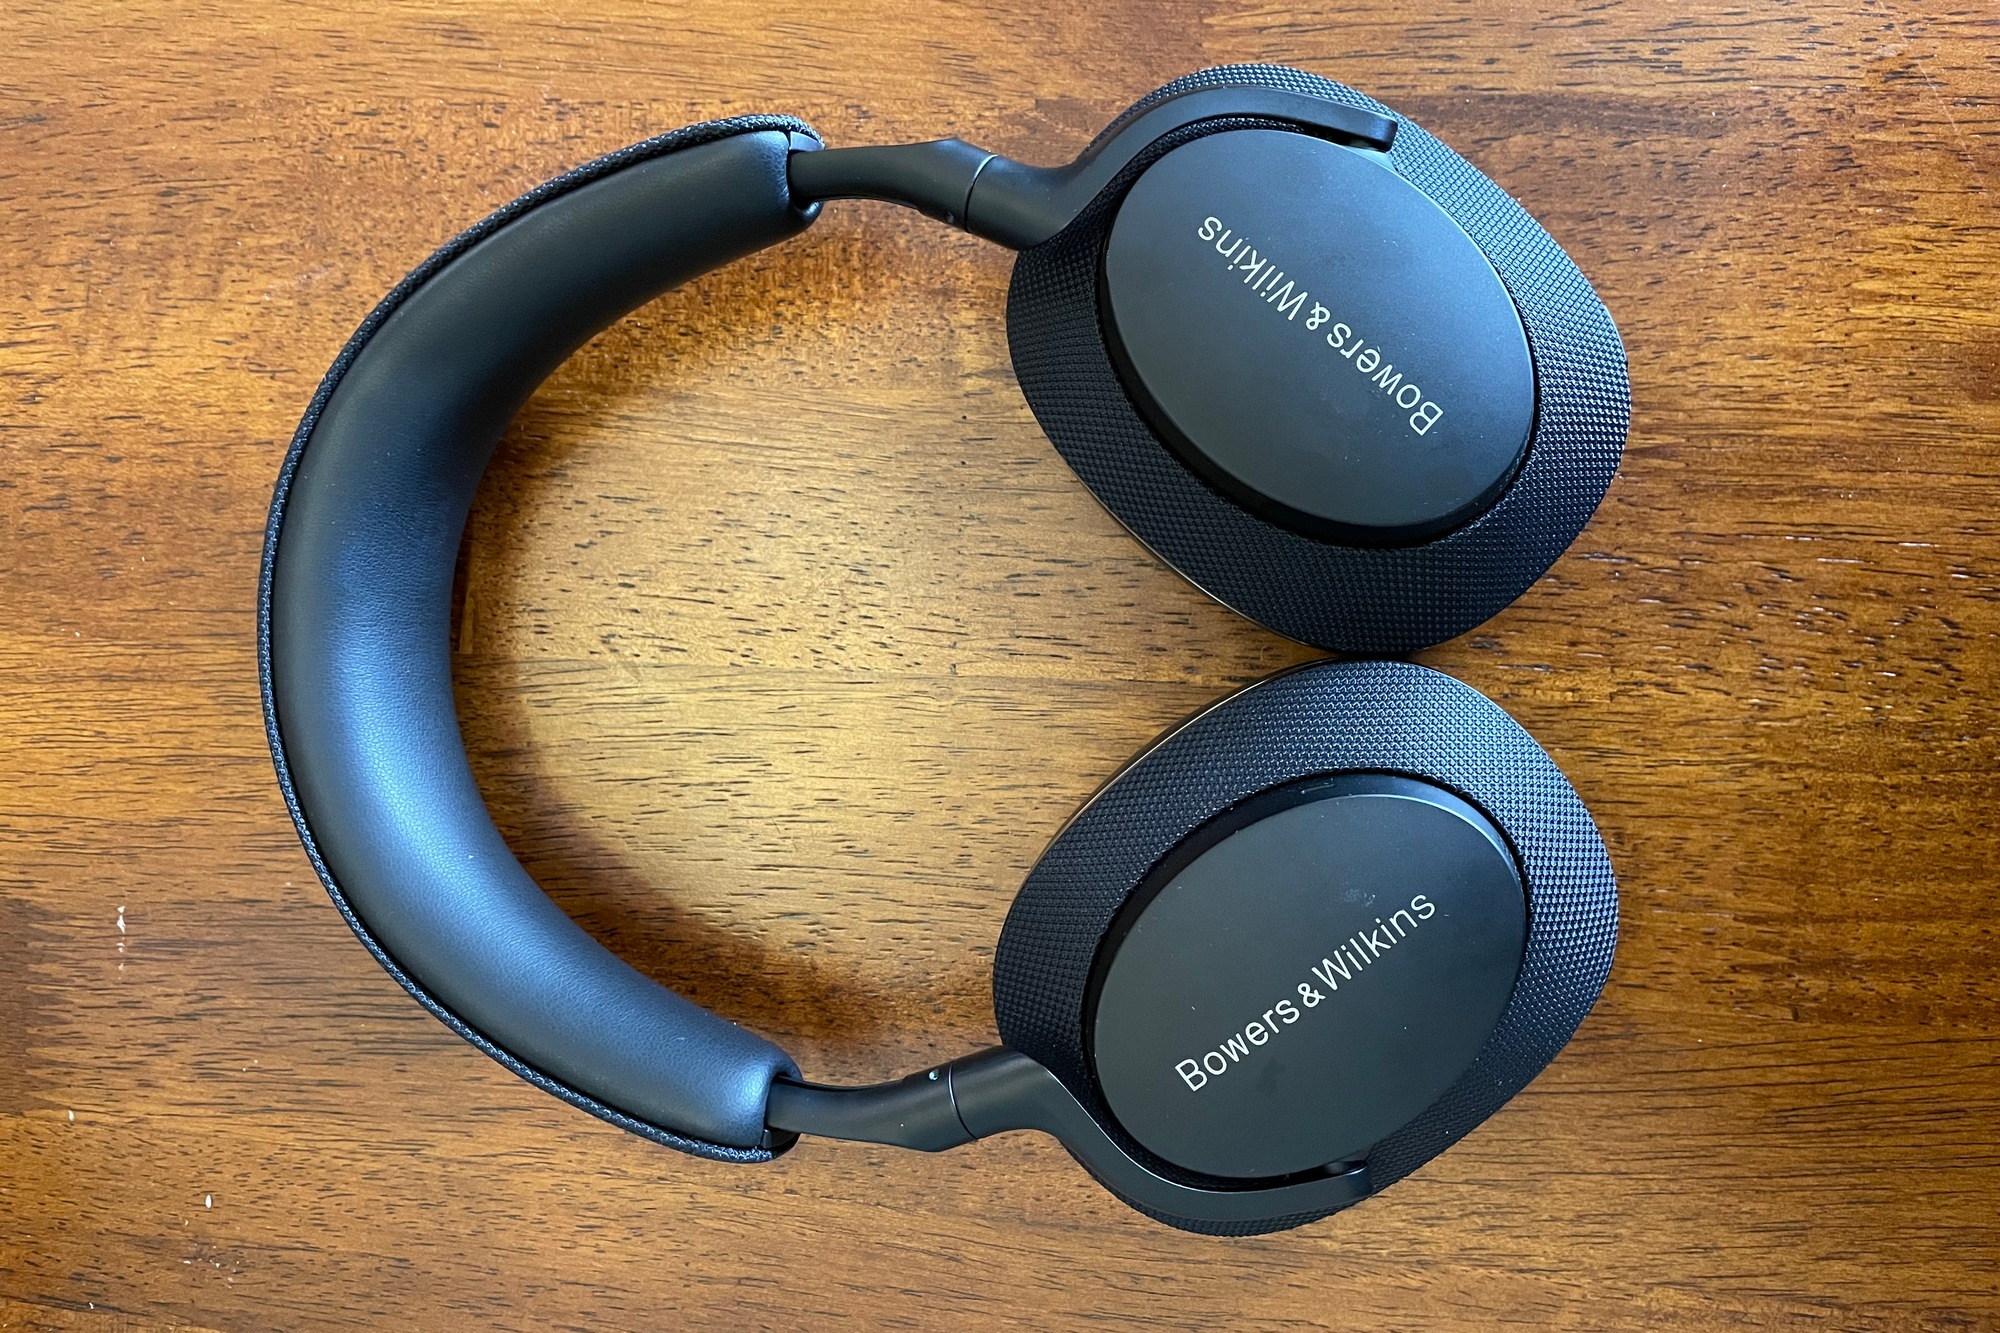 Bowers & Wilkins Px7 S2 noise-cancelling headphones